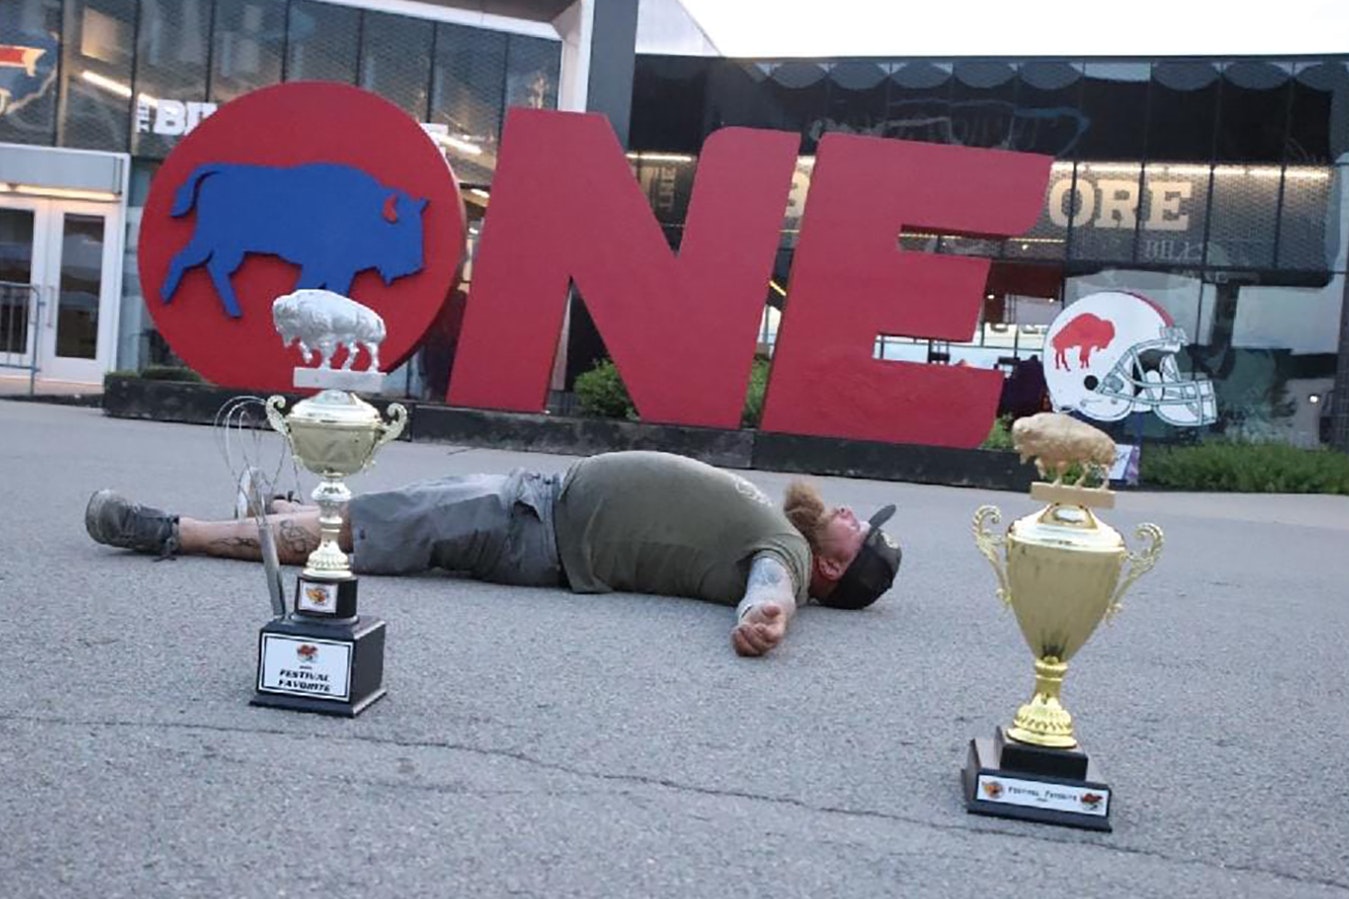 Weitzels Wings owner and founder Trent Weitzel with his back-to-back Festival Favorite trophies for 2022 and 2023 at the National Buffalo Wing Festival in Buffalo, New York.